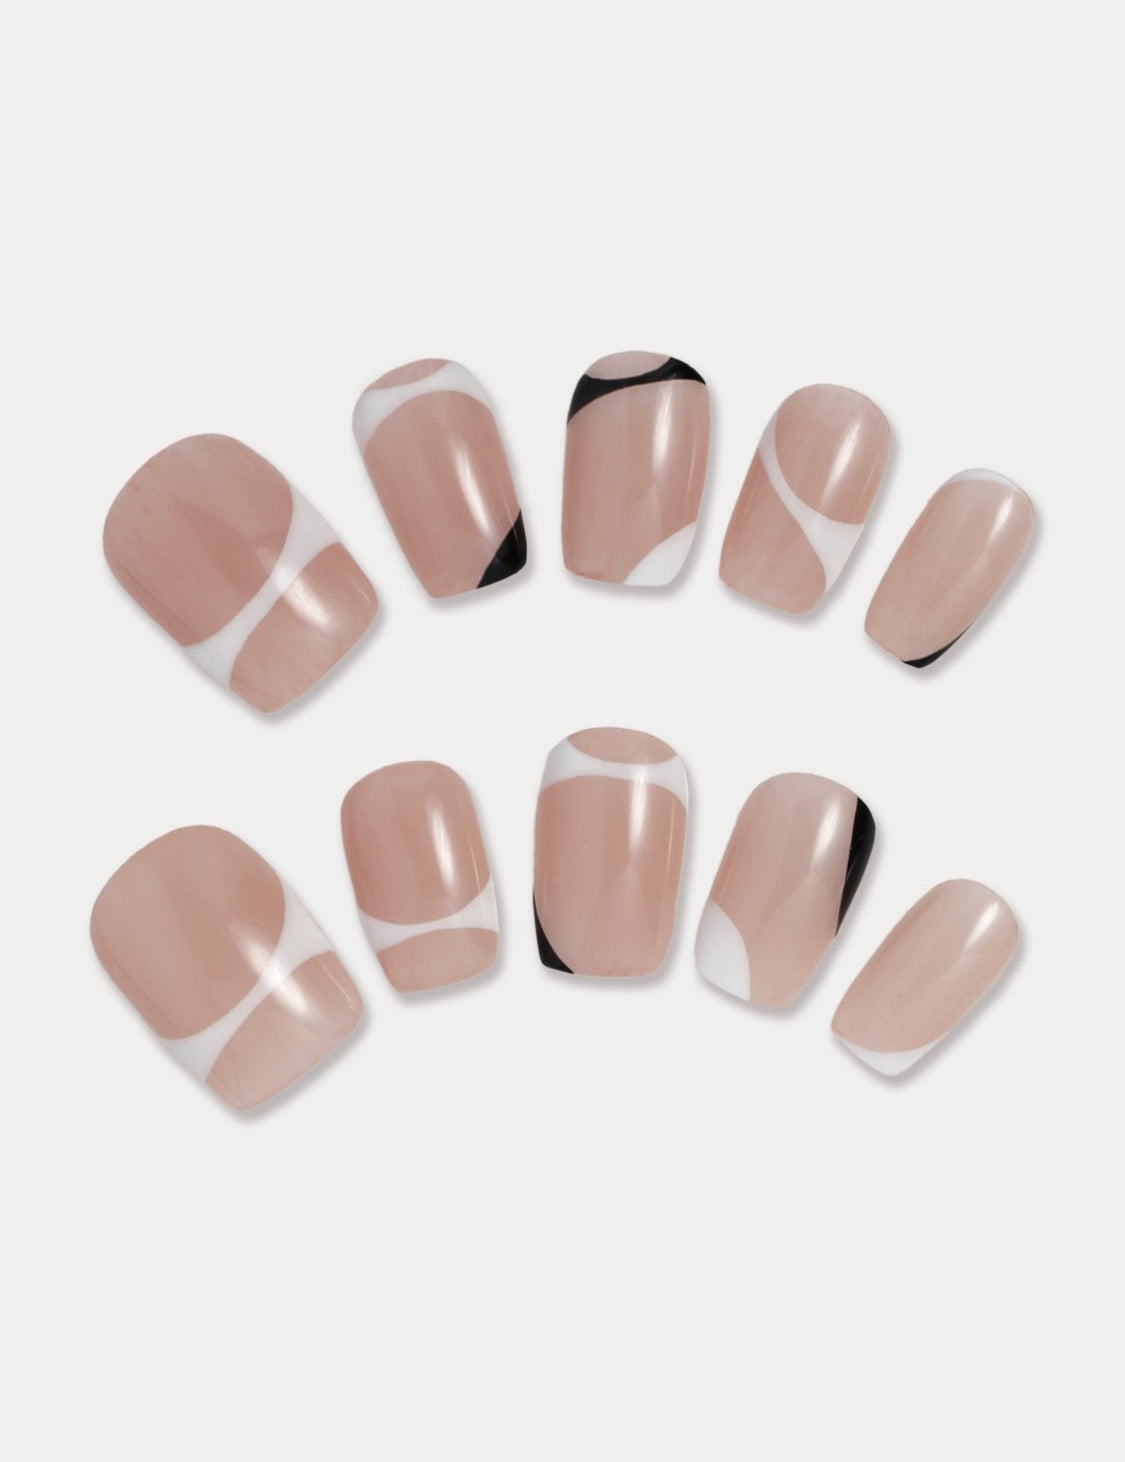 MIEAP Black and White Pattern press on nail set is perfect for the office. Its classic, irregular-shaped design features a black and white pattern overlay on a nude-colored base. The short square shape adds practicality for everyday use. #MIEAP #MIEAPnails #pressonnail #falsenail #nailsart #naildesigns #nailinspo #handmadenail #summernail #nail2023 #classicnail #shortnail #shortsquarenail #nudenail #whitenail #blacknail